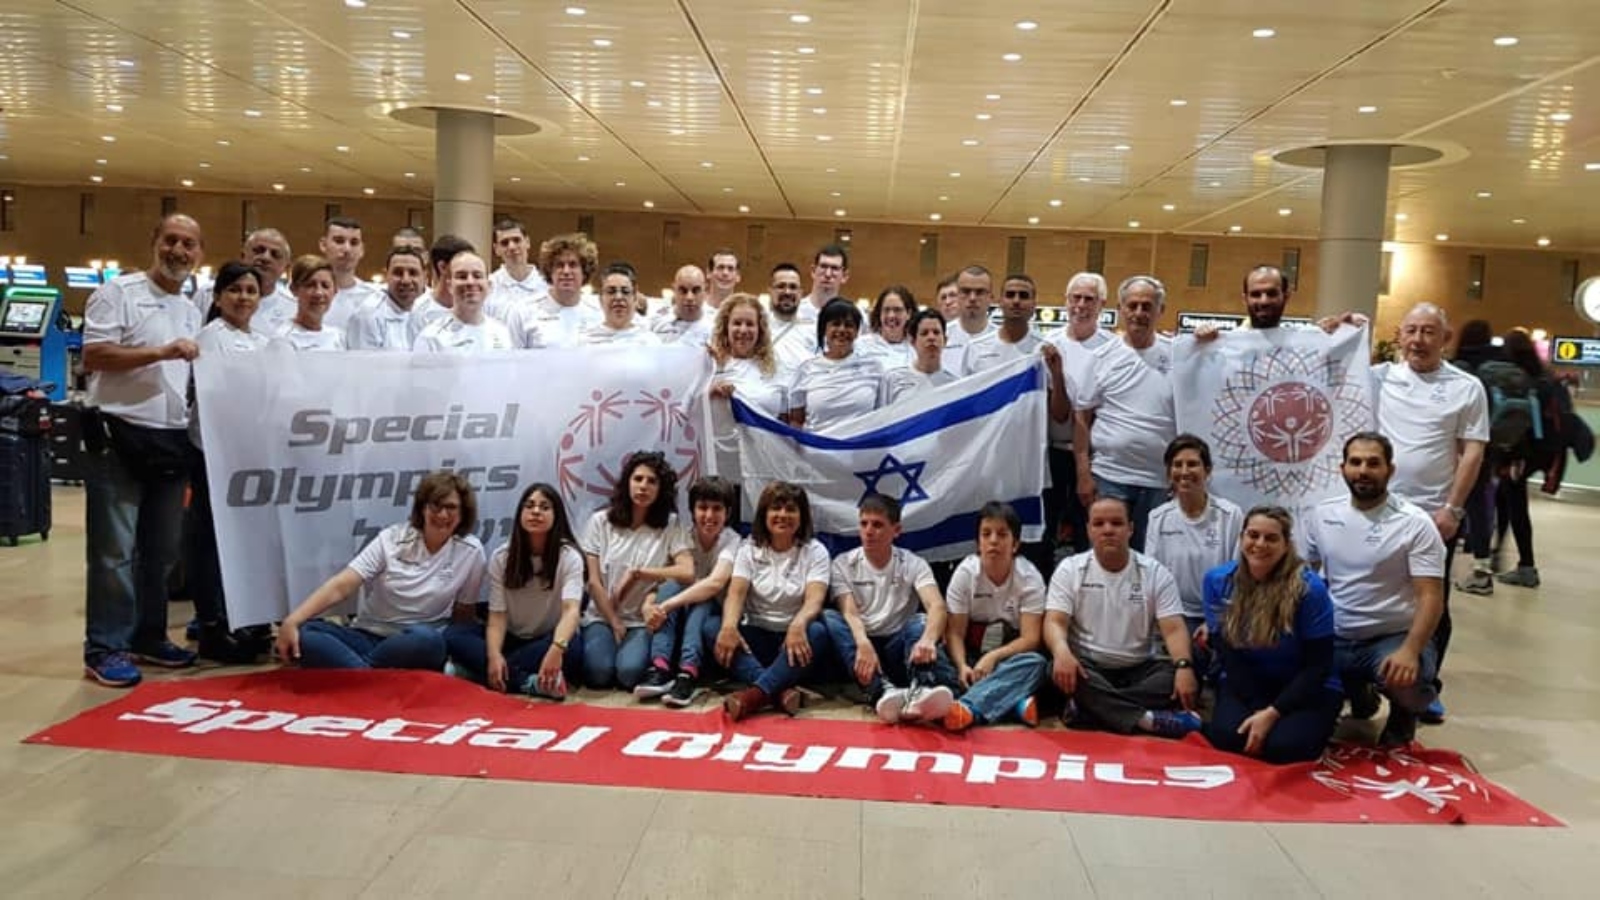 Israel’s team at the Special Olympics World Games in Abu Dhabi. Photo via Facebook